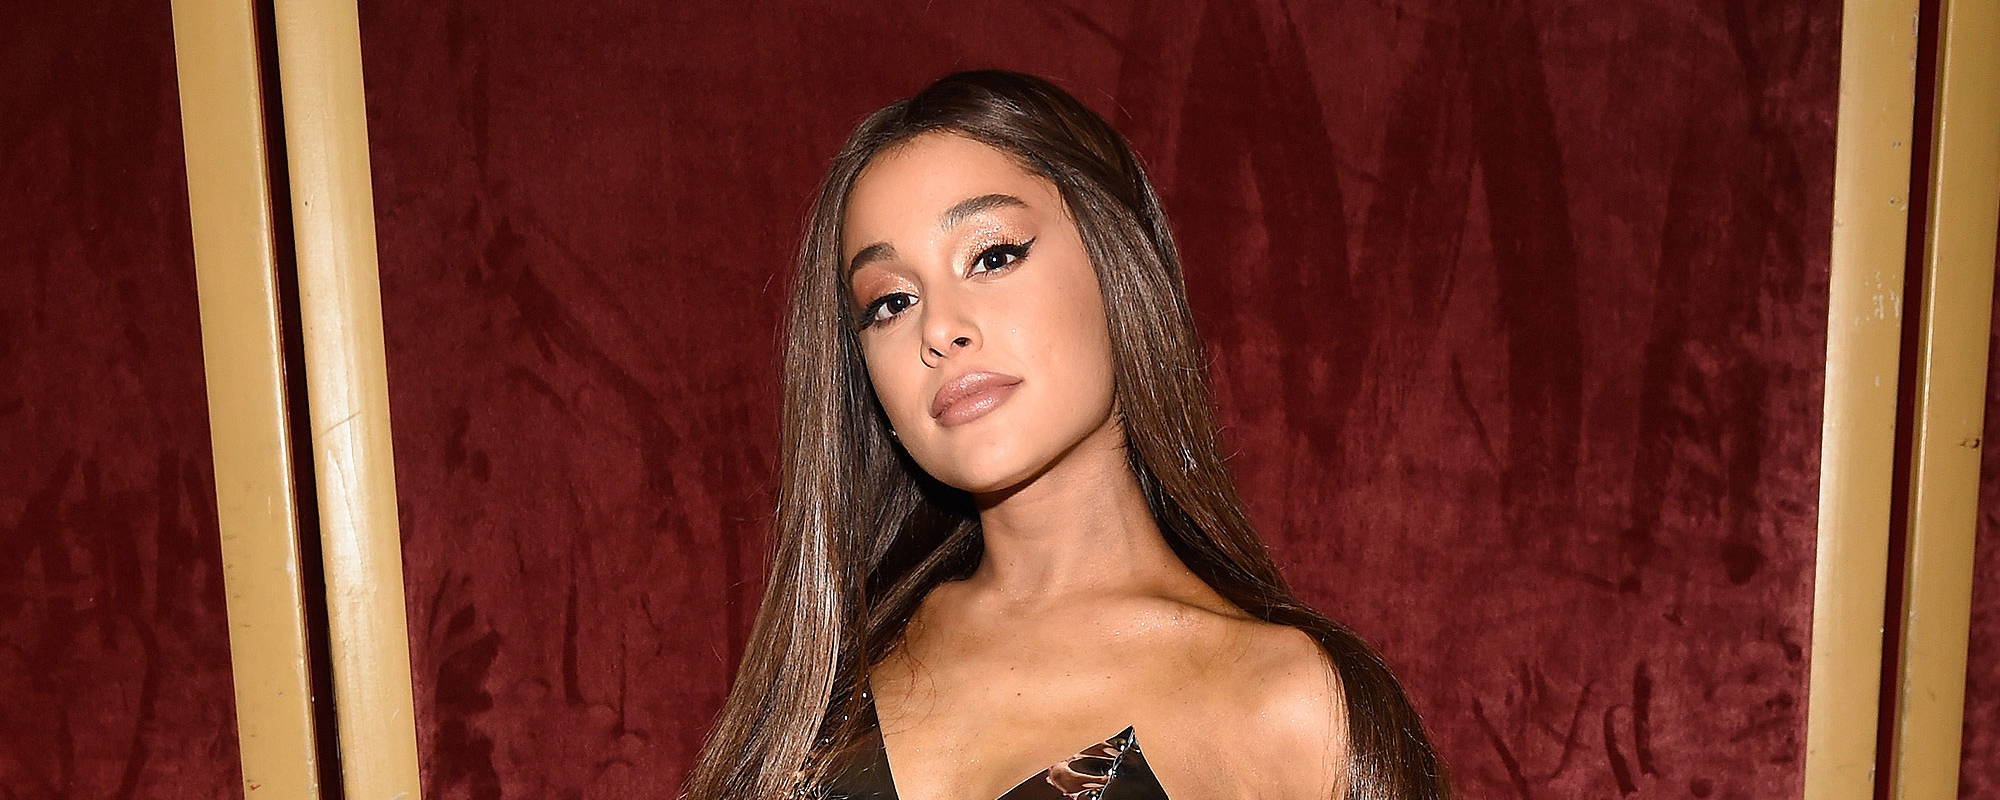 The Latest News and a Look at Ariana Grande’s Engagement Ring!